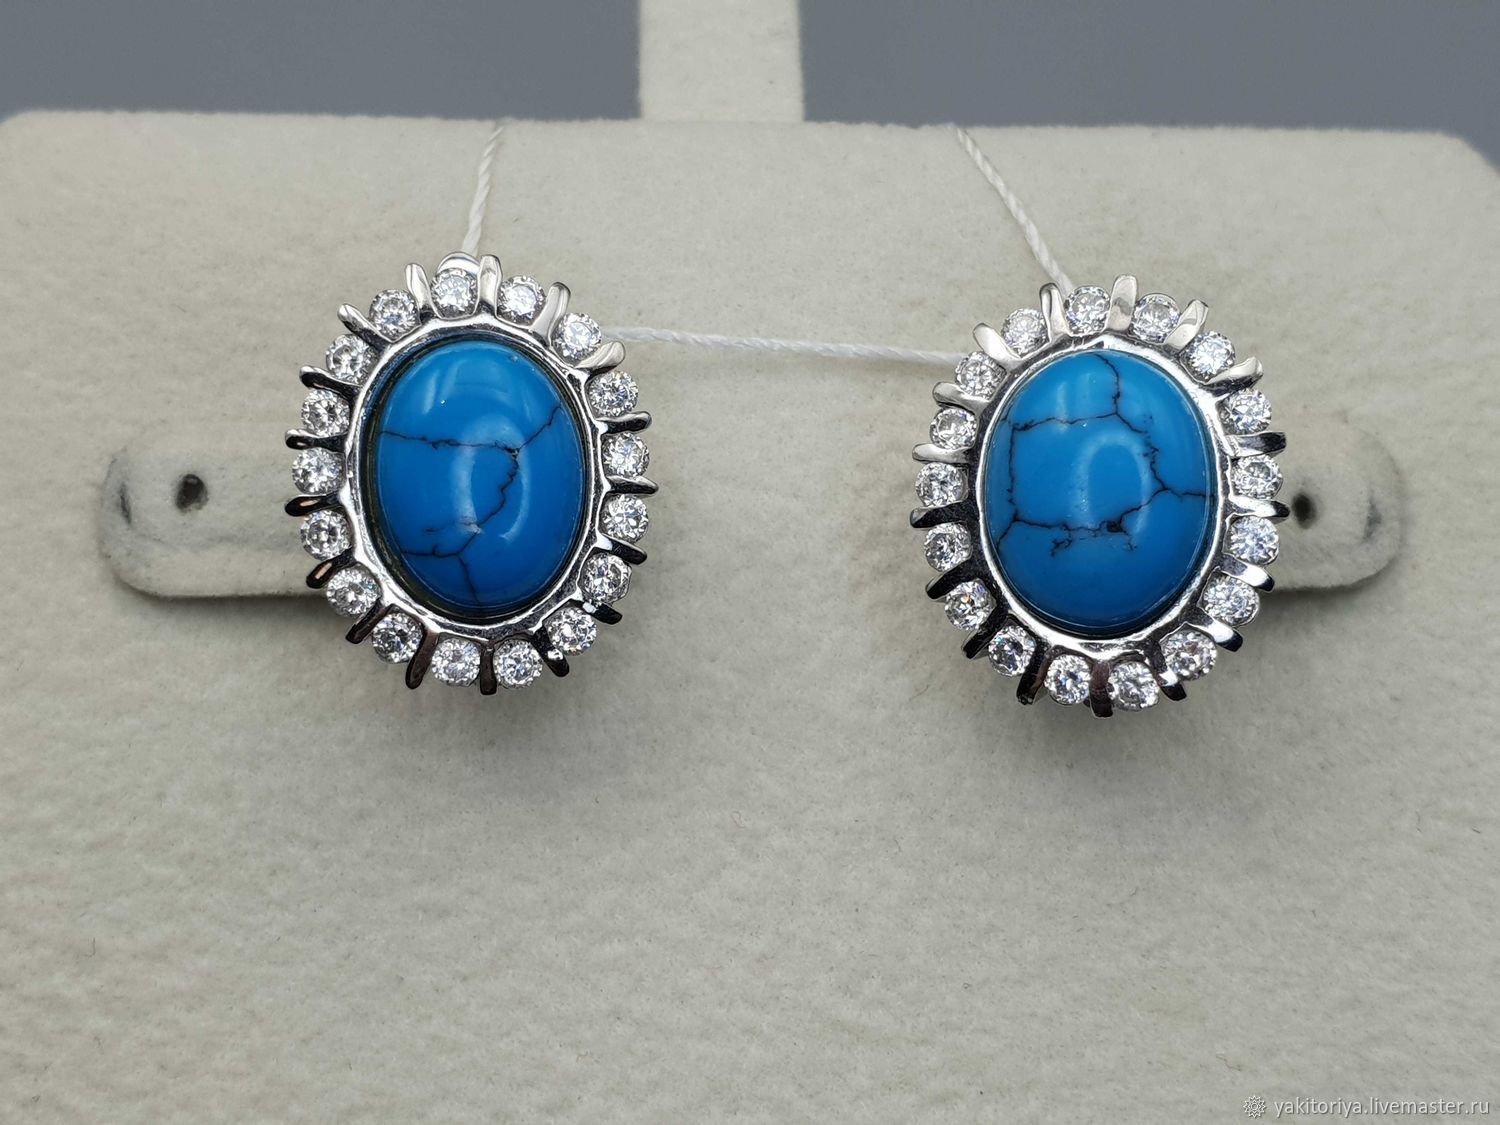 Silver earrings with turquoise 11h8 mm and cubic zirconia, Earrings, Moscow,  Фото №1